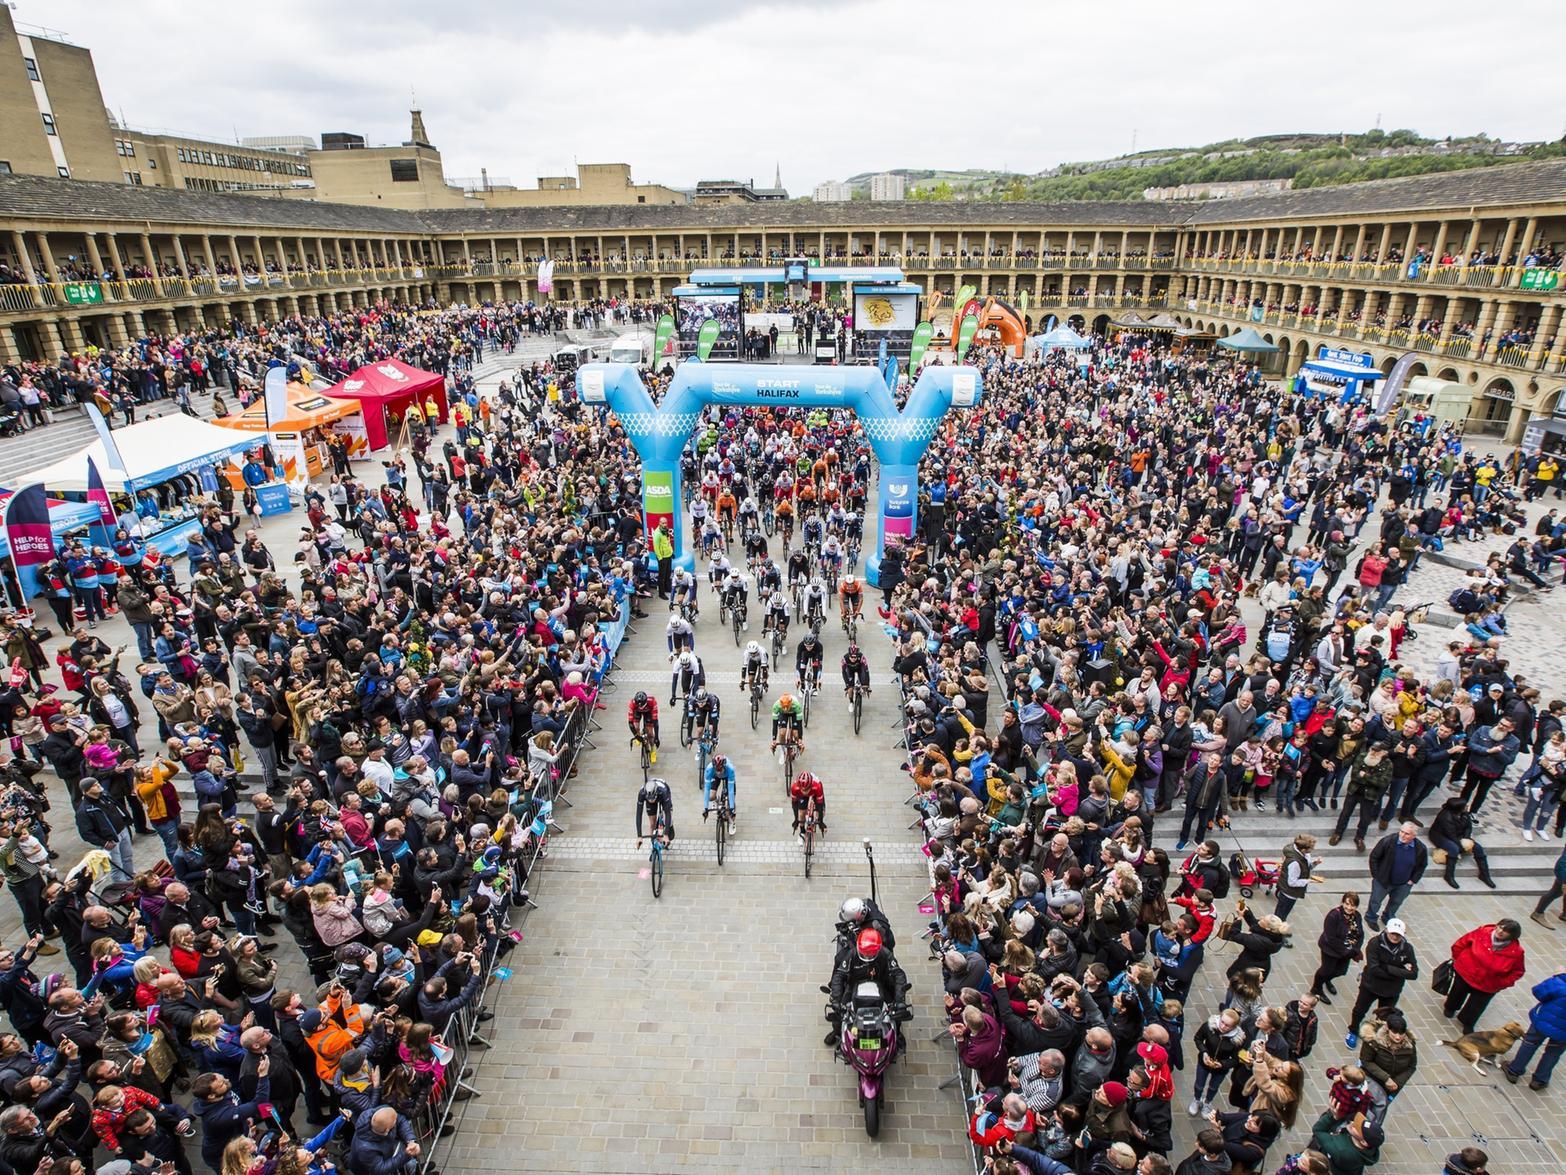 The Tour de Yorkshire is making a return to the Piece Hall, Halifax in May. The major cycling event has used the iconic venue as a starting point for the final day of racing over the past few years and fans are expected to flock to see the riders.